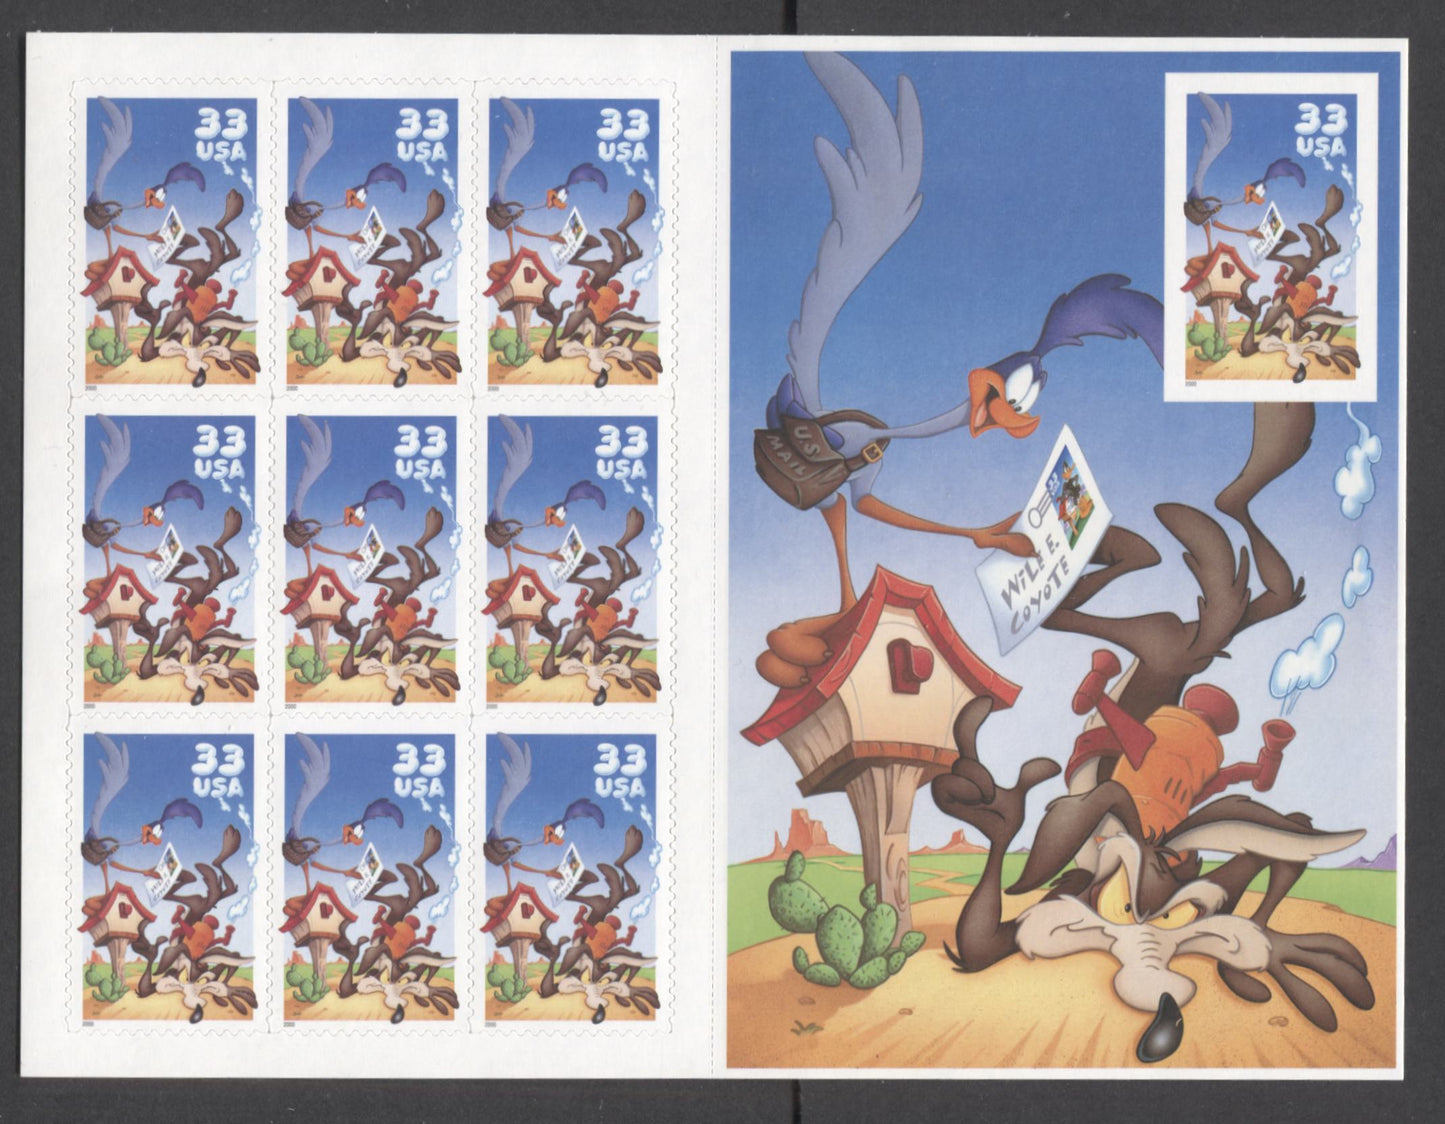 Lot 75 United States SC#3391 33c Multicolored 2001 Roadrunner Issue, A VFNH Imperf Sheet Of 10, Click on Listing to See ALL Pictures, 2017 Scott Cat. $10